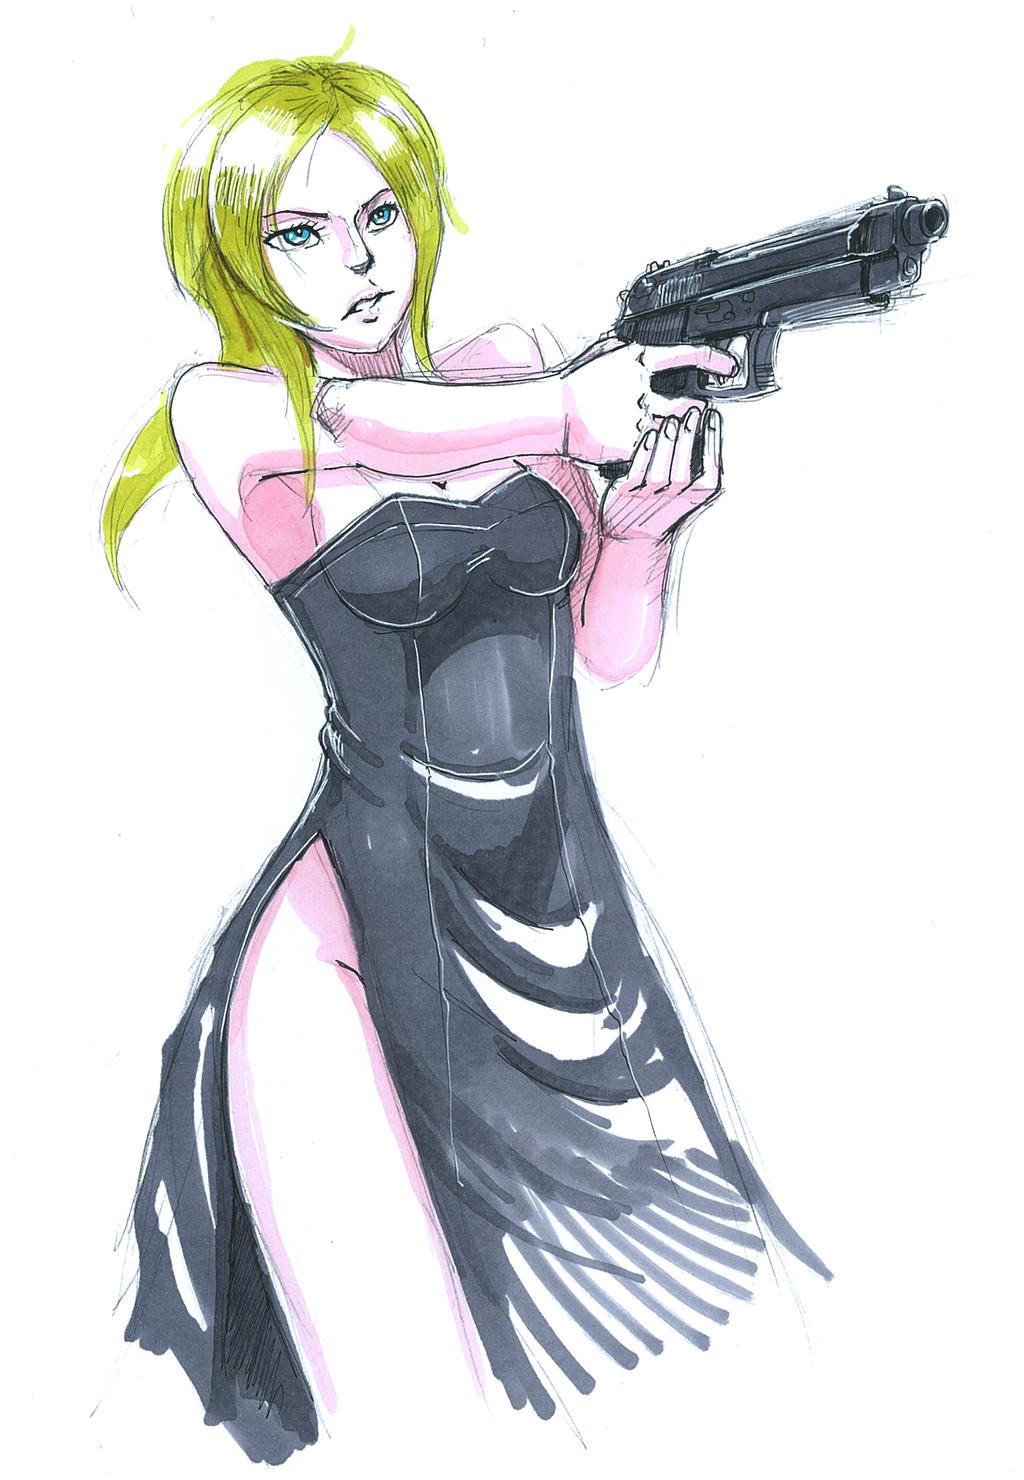 Aya Brea ~ Parasite Eve by Iinsectica on DeviantArt